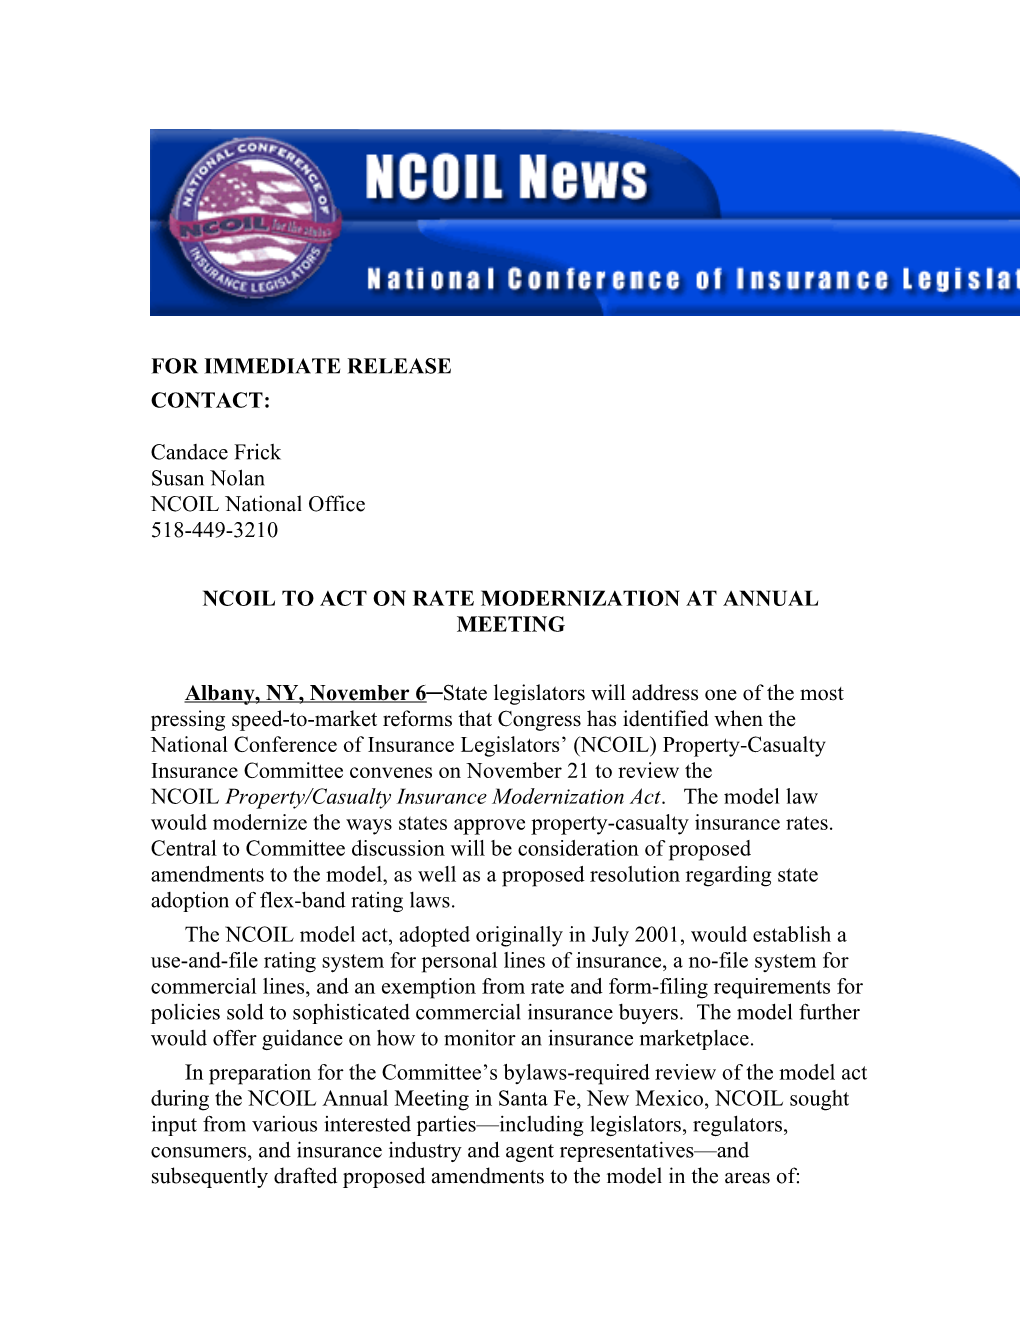 Ncoil to Act on Rate Modernization at Annual Meeting